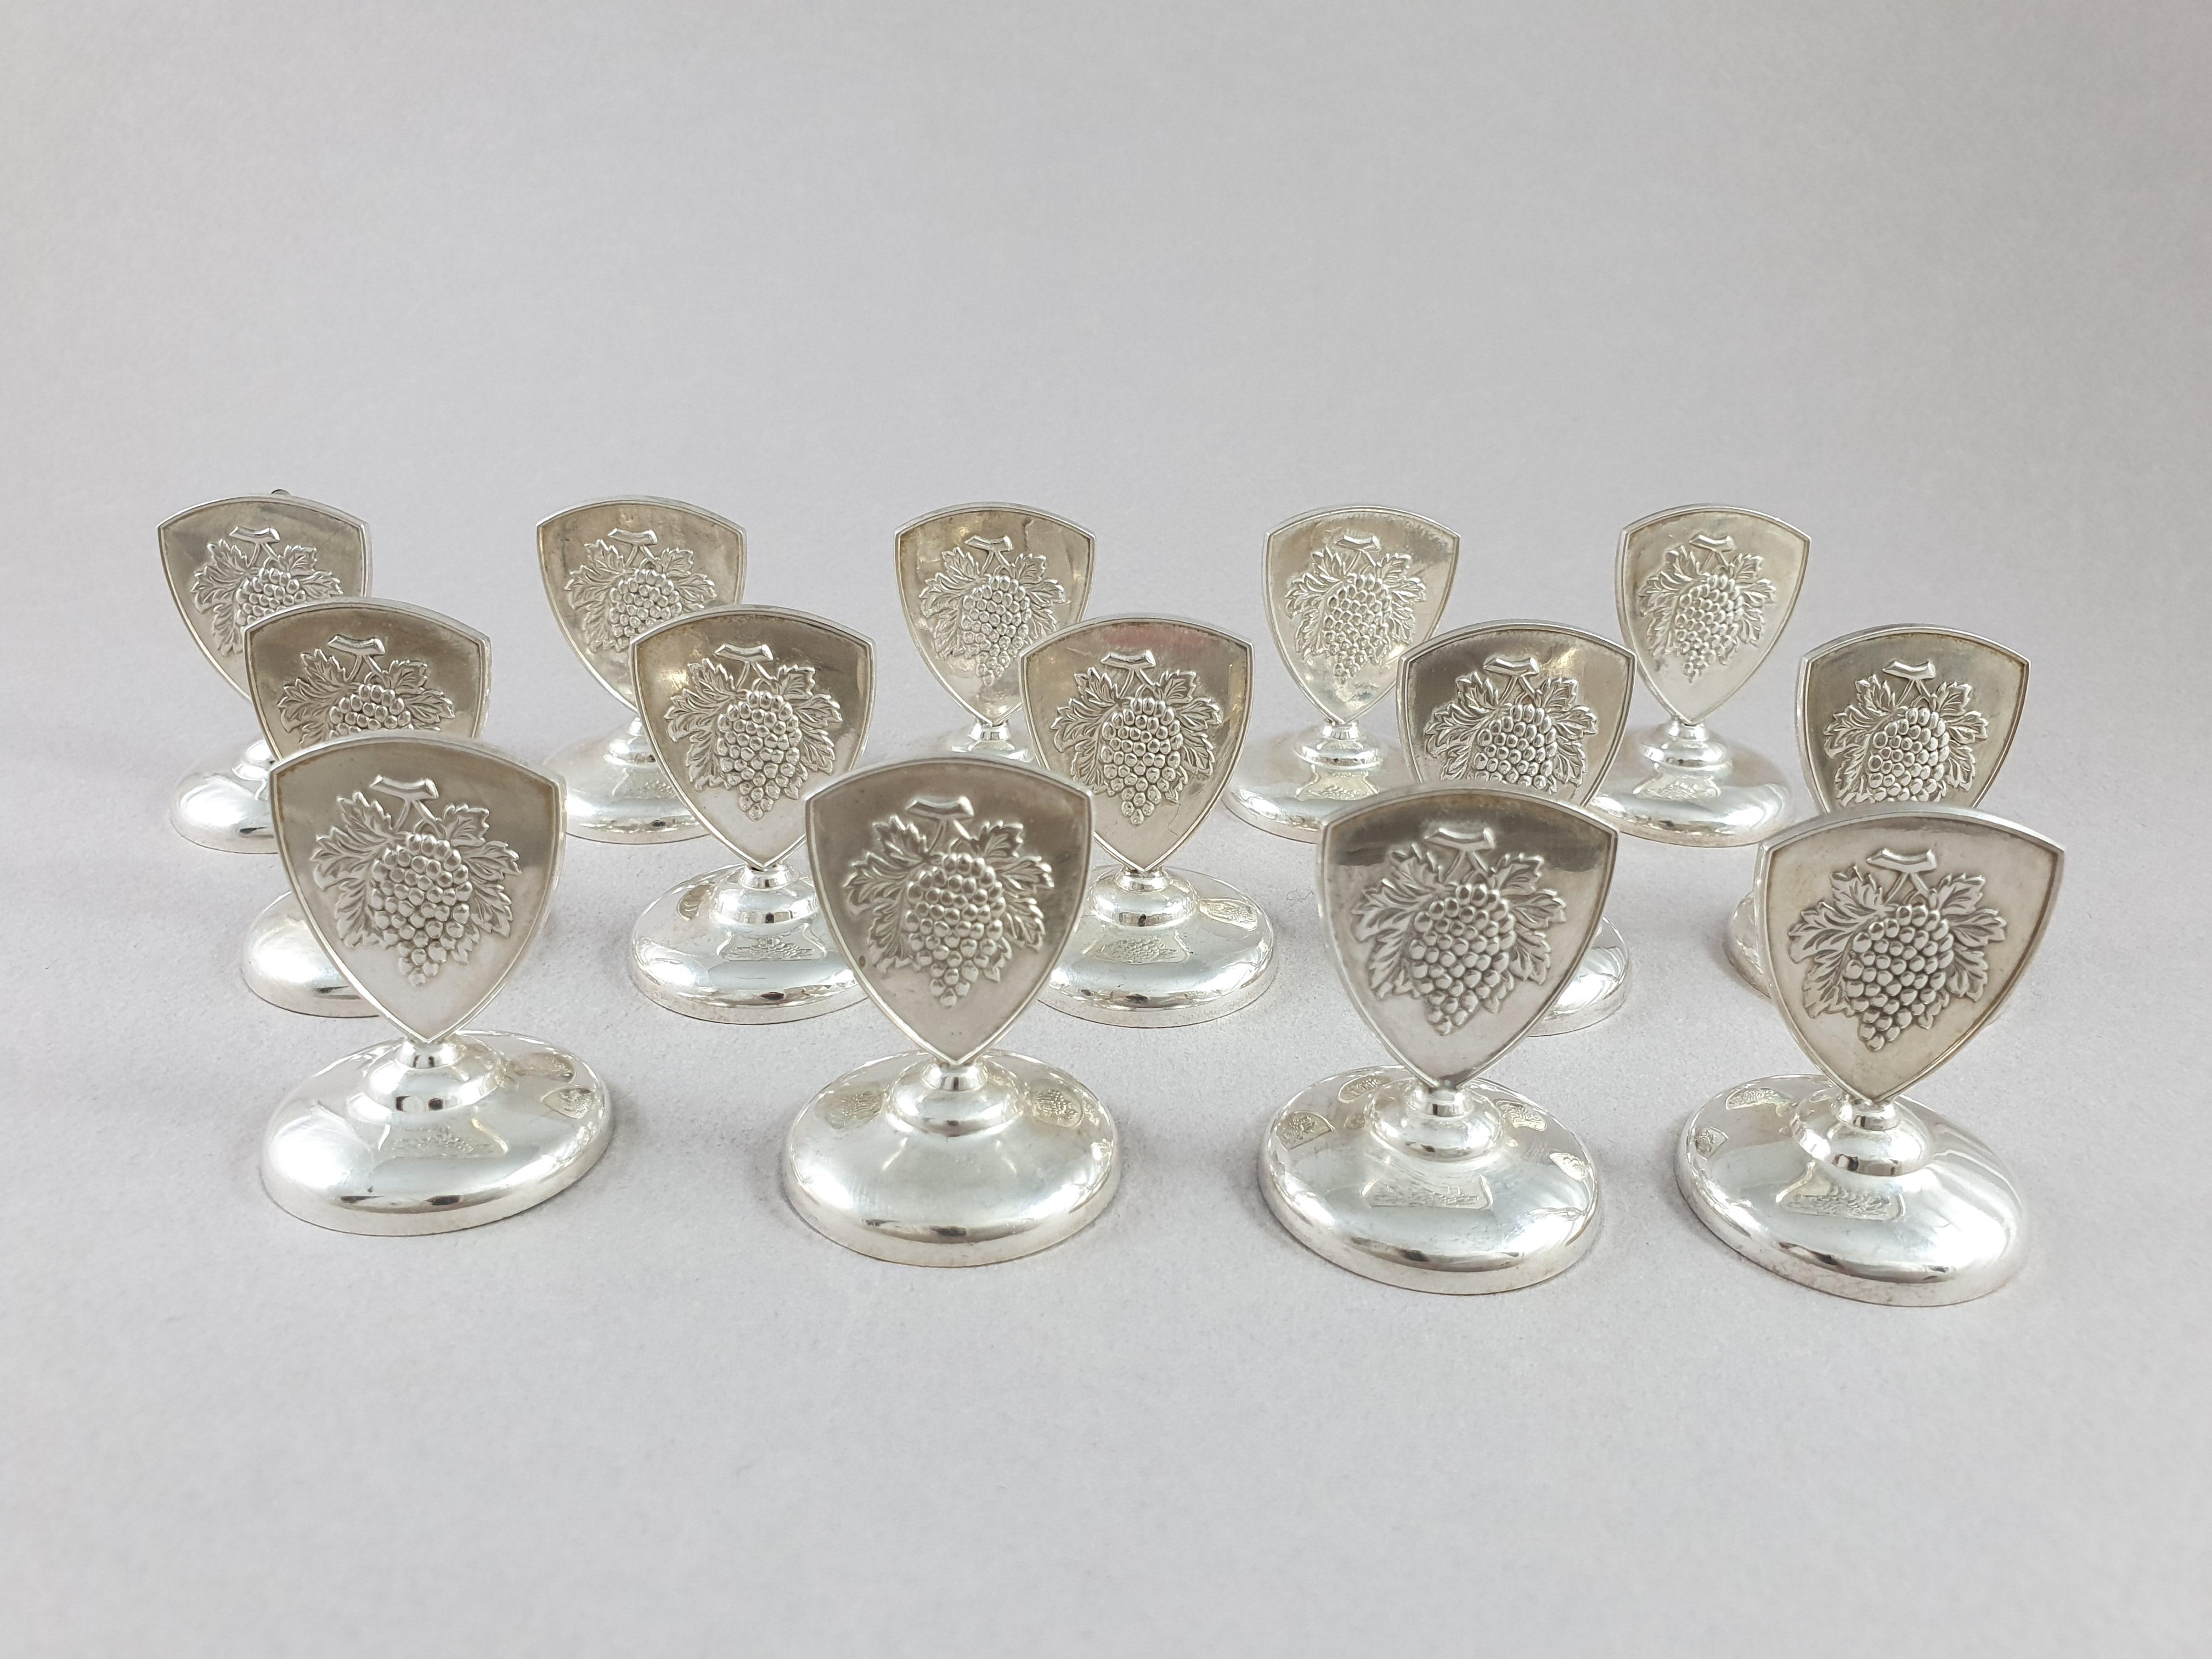 14 place cards holders in solid silver 

Decorated with vine leaves and grapes 

800 silver hallmark 

Measures: Height: 3.8 cm 
Base diameter: 3 cm 
Weight: 217 grams

Good condition.